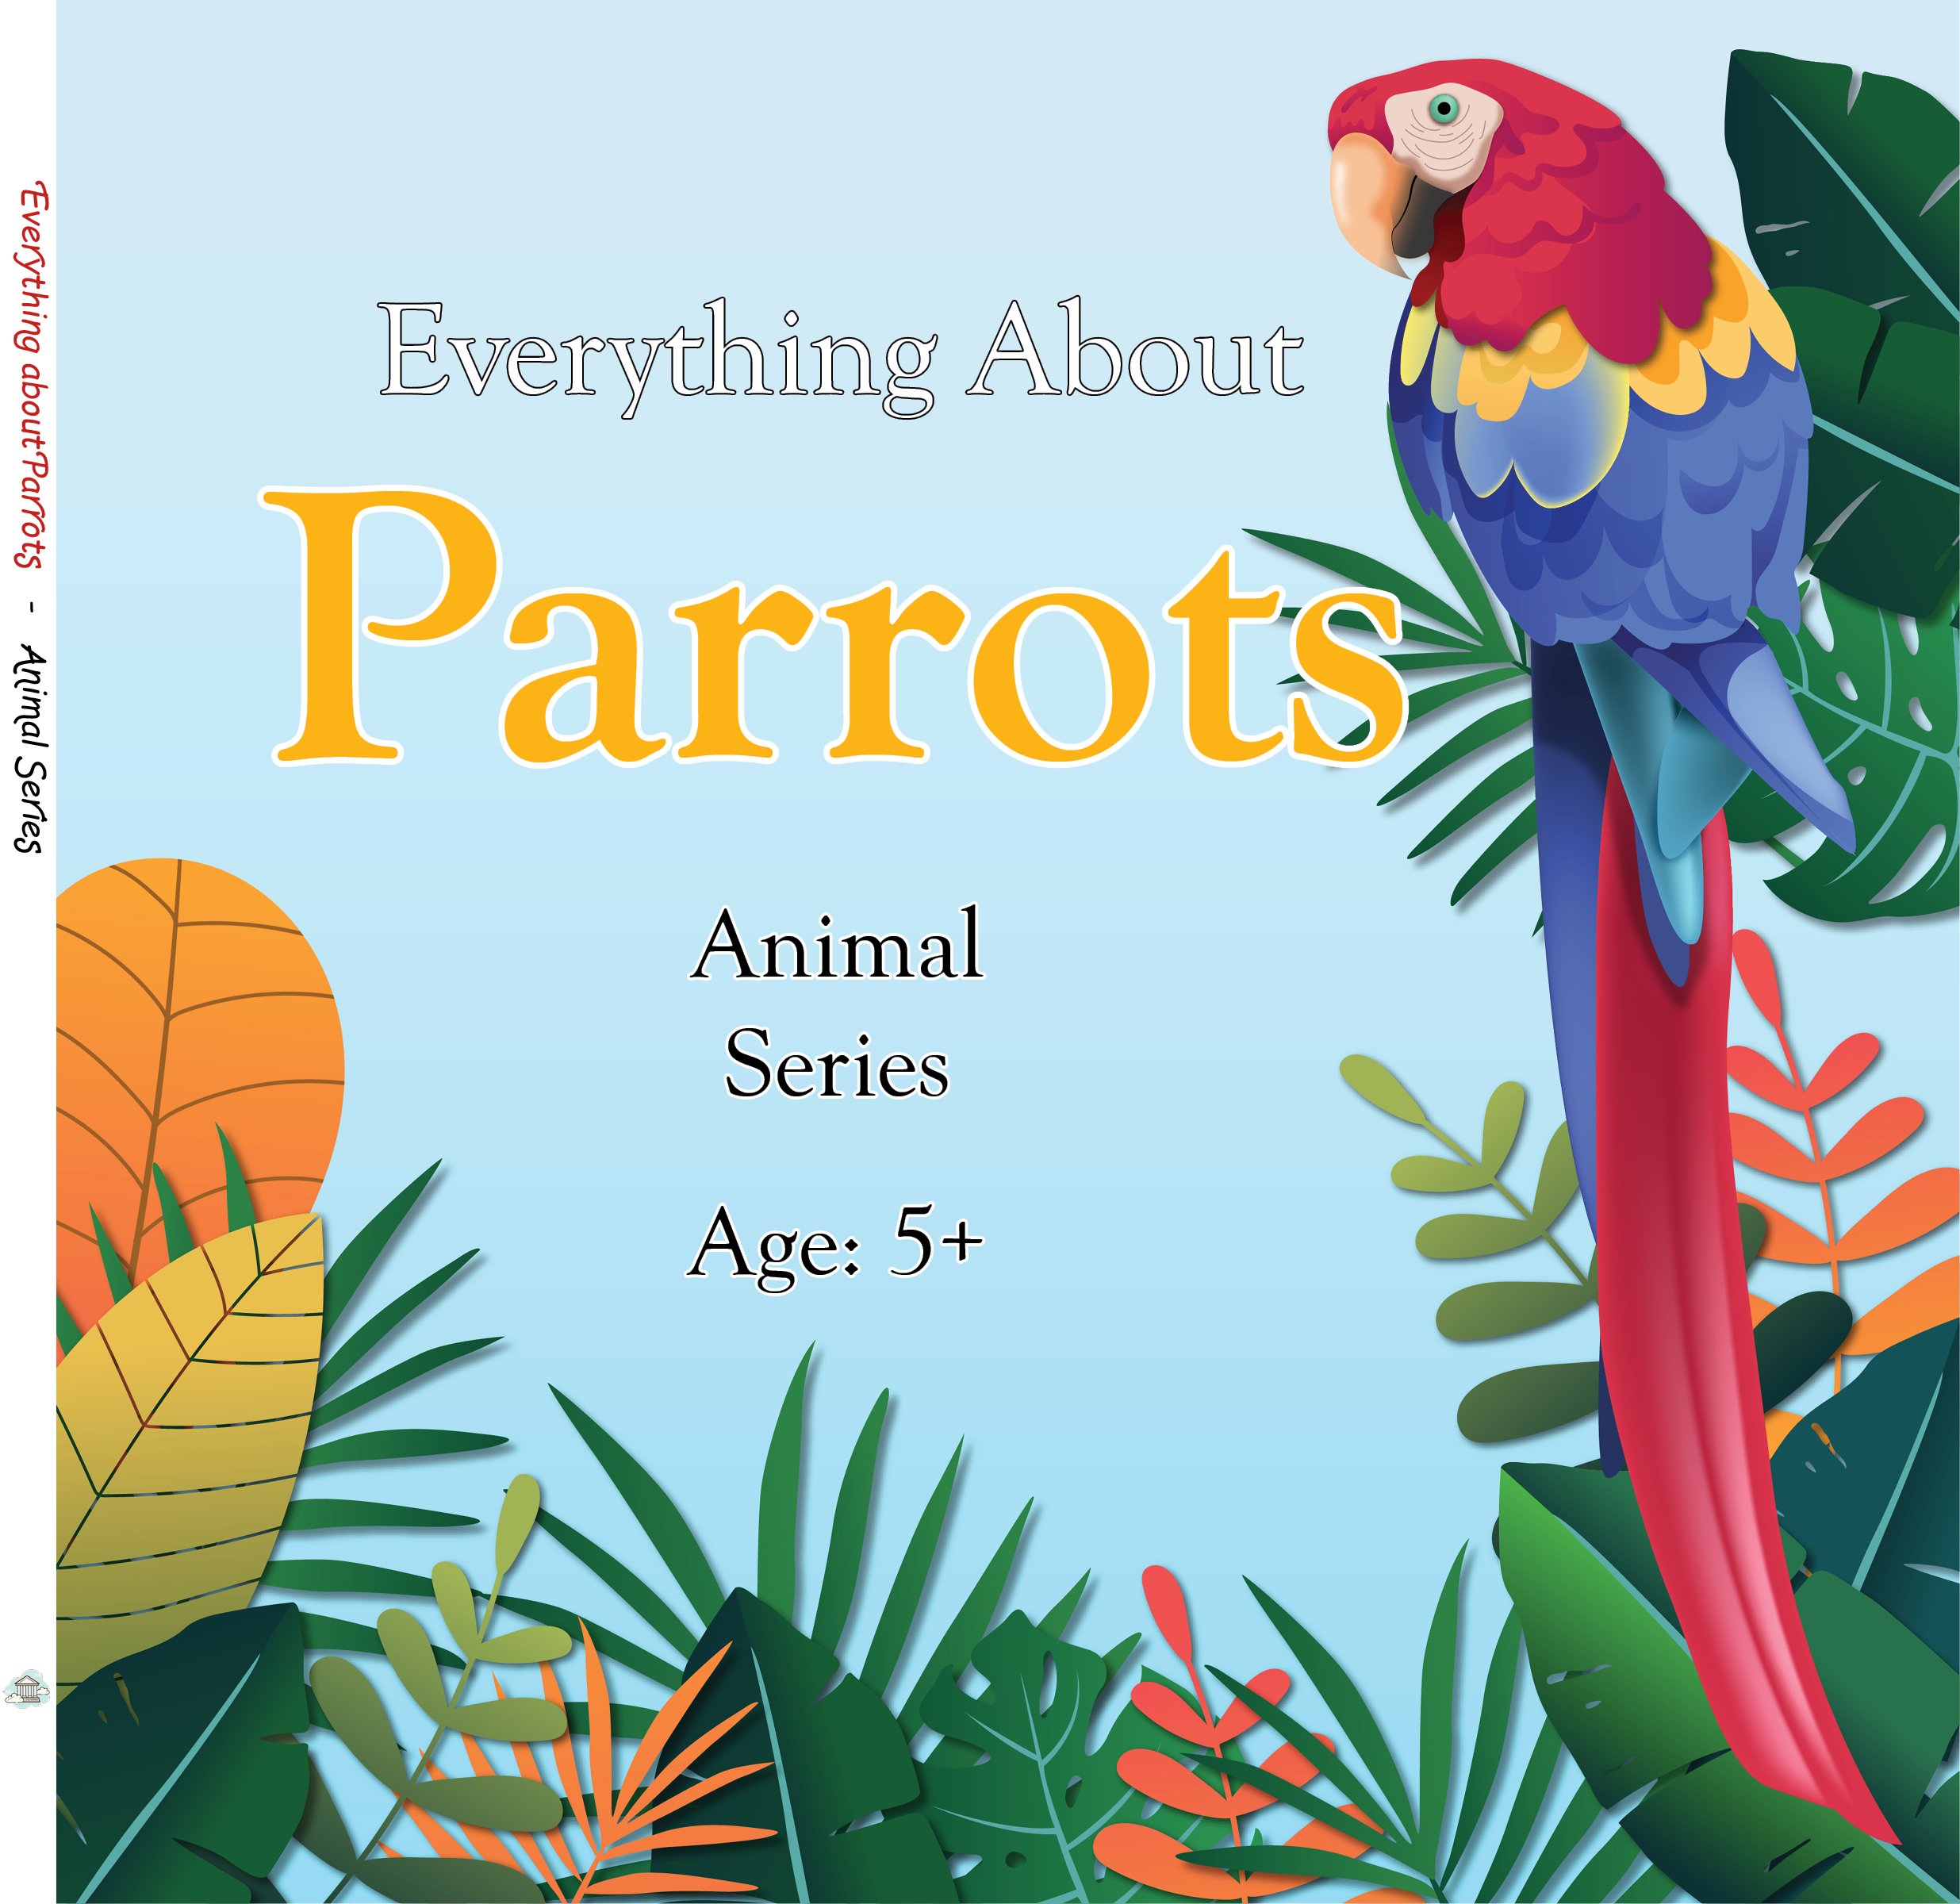 Everything about Parrots - Animal Series.jpg